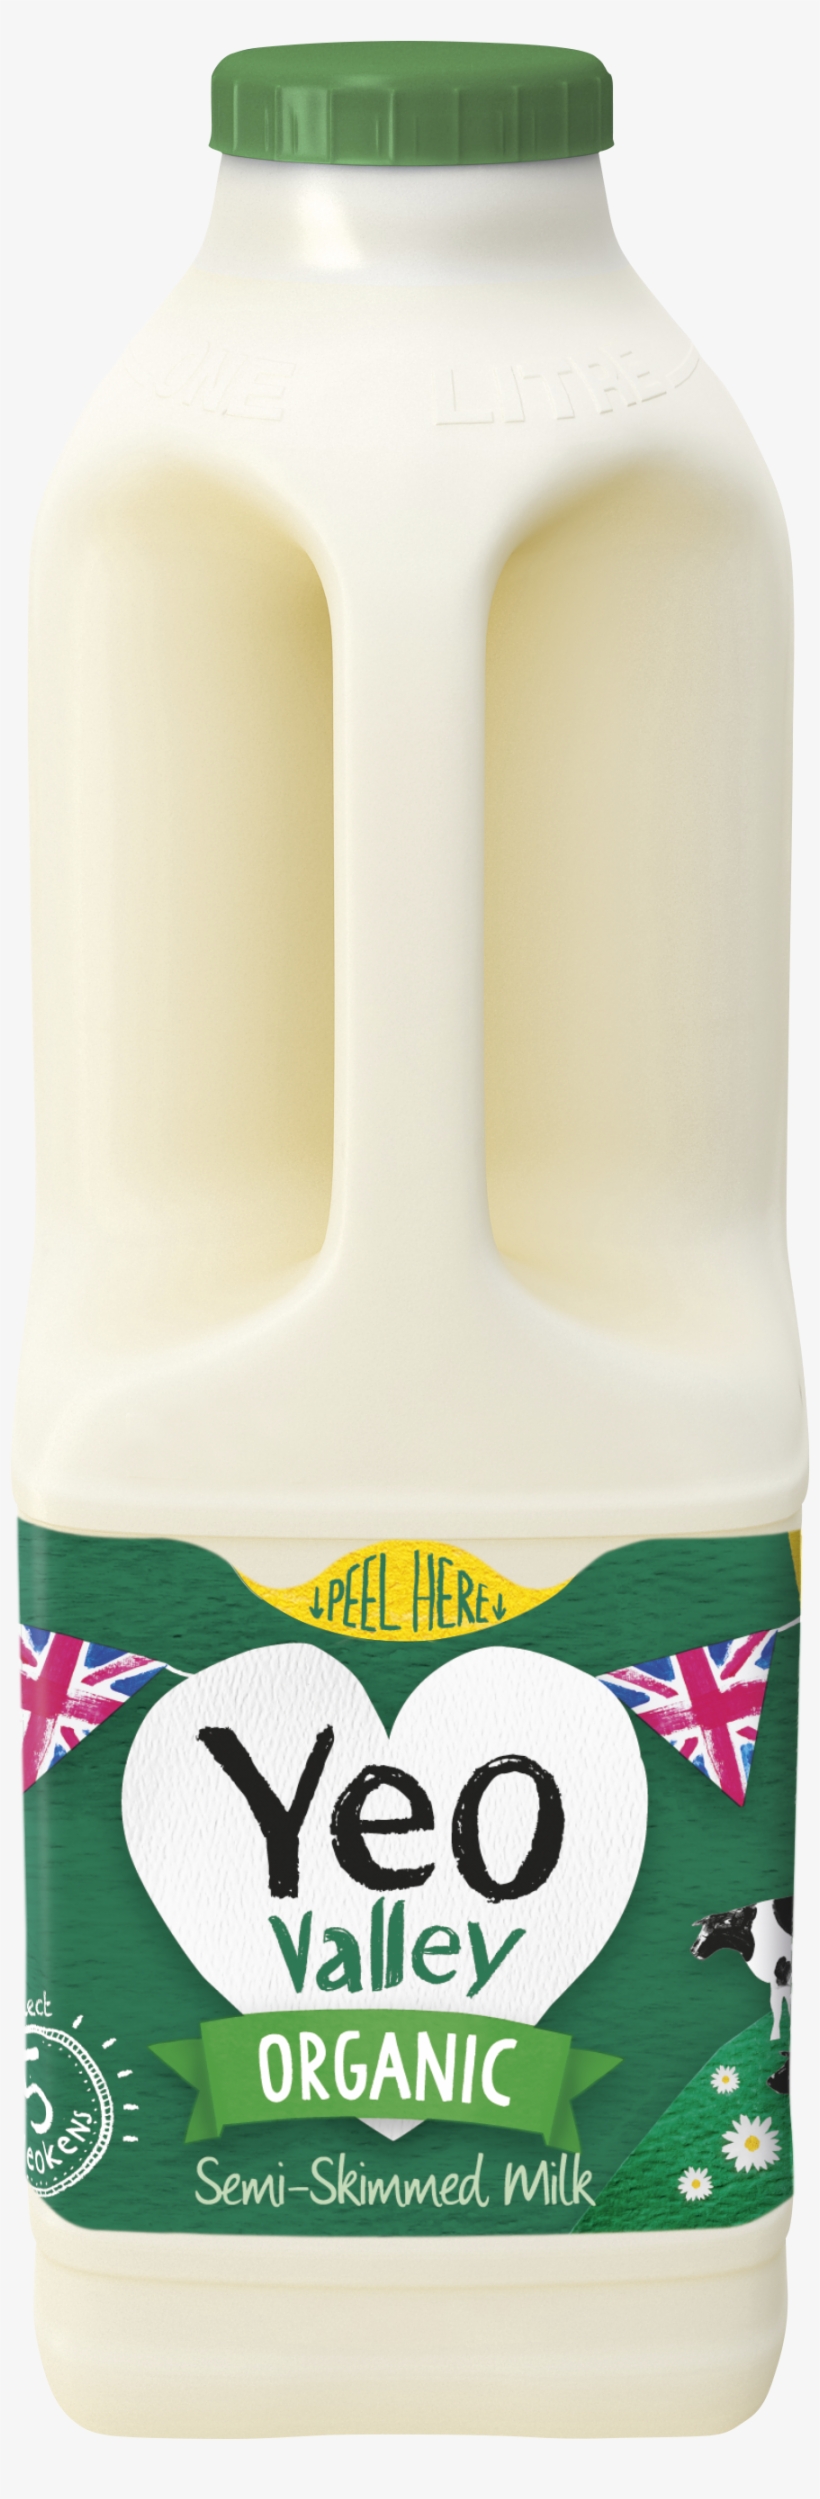 Semi-skimmed - Yeo Valley Milk, transparent png #2828852